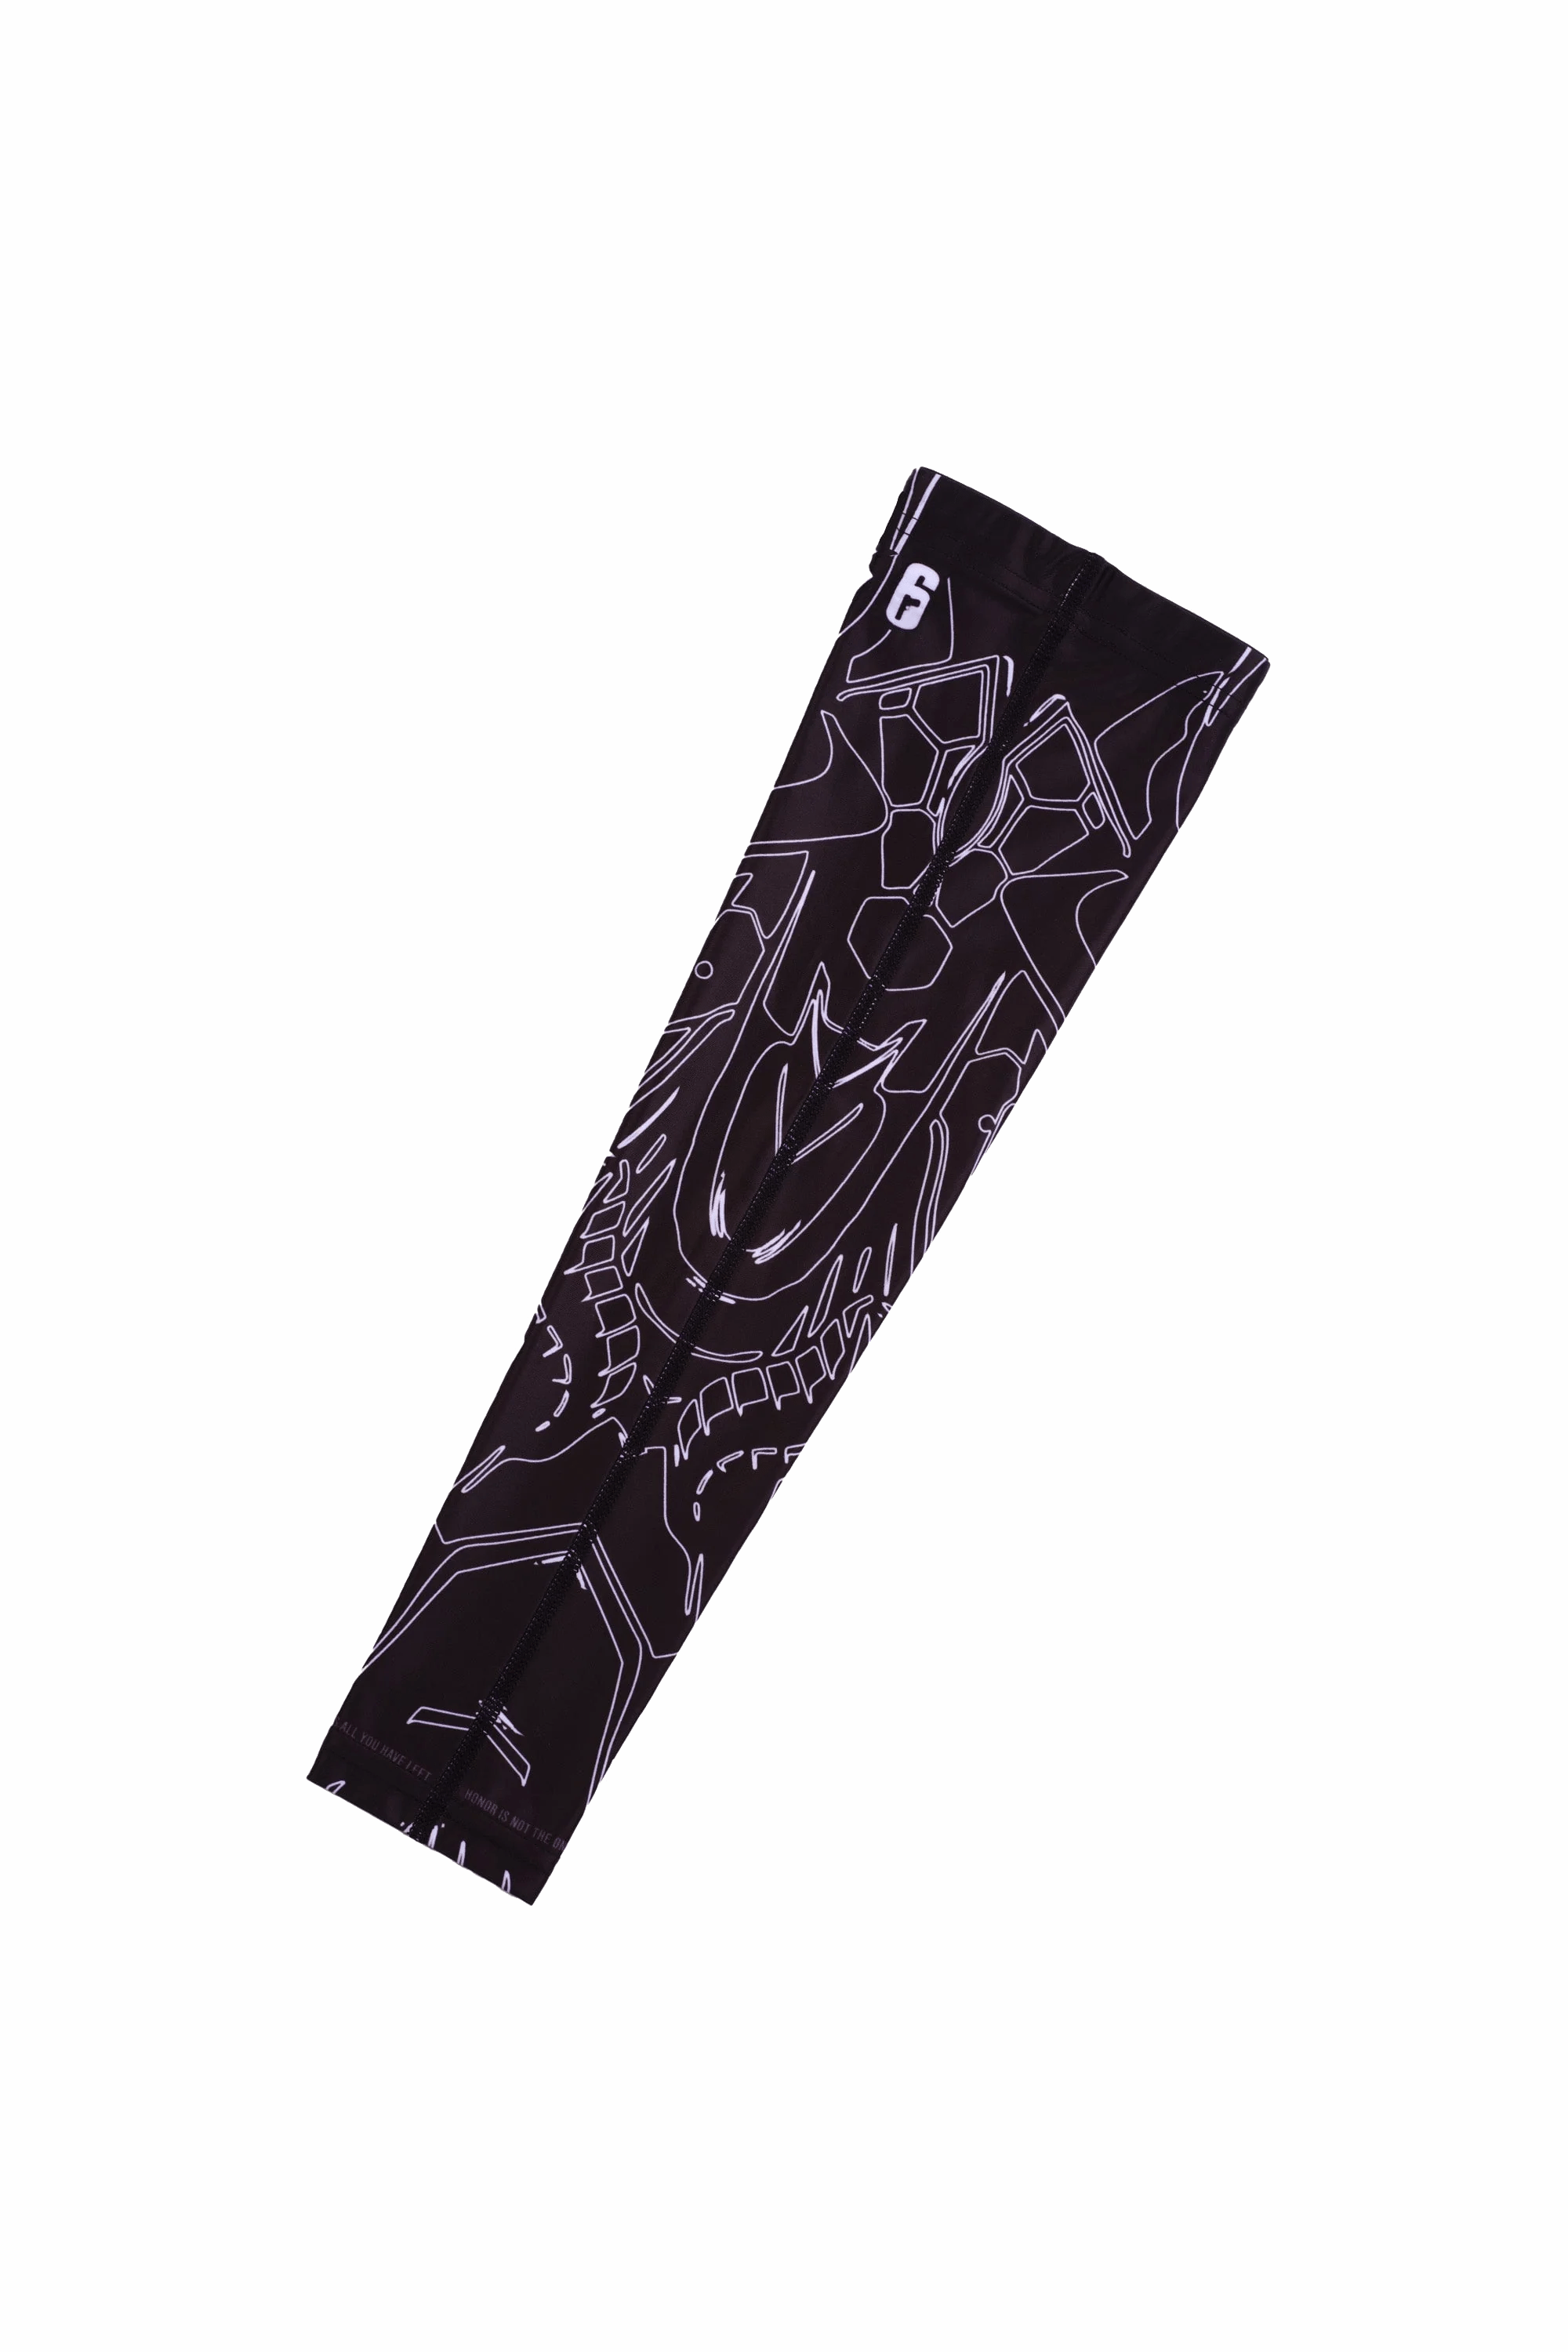 where to buy a gamer sleeve like the pro's have : r/R6ProLeague